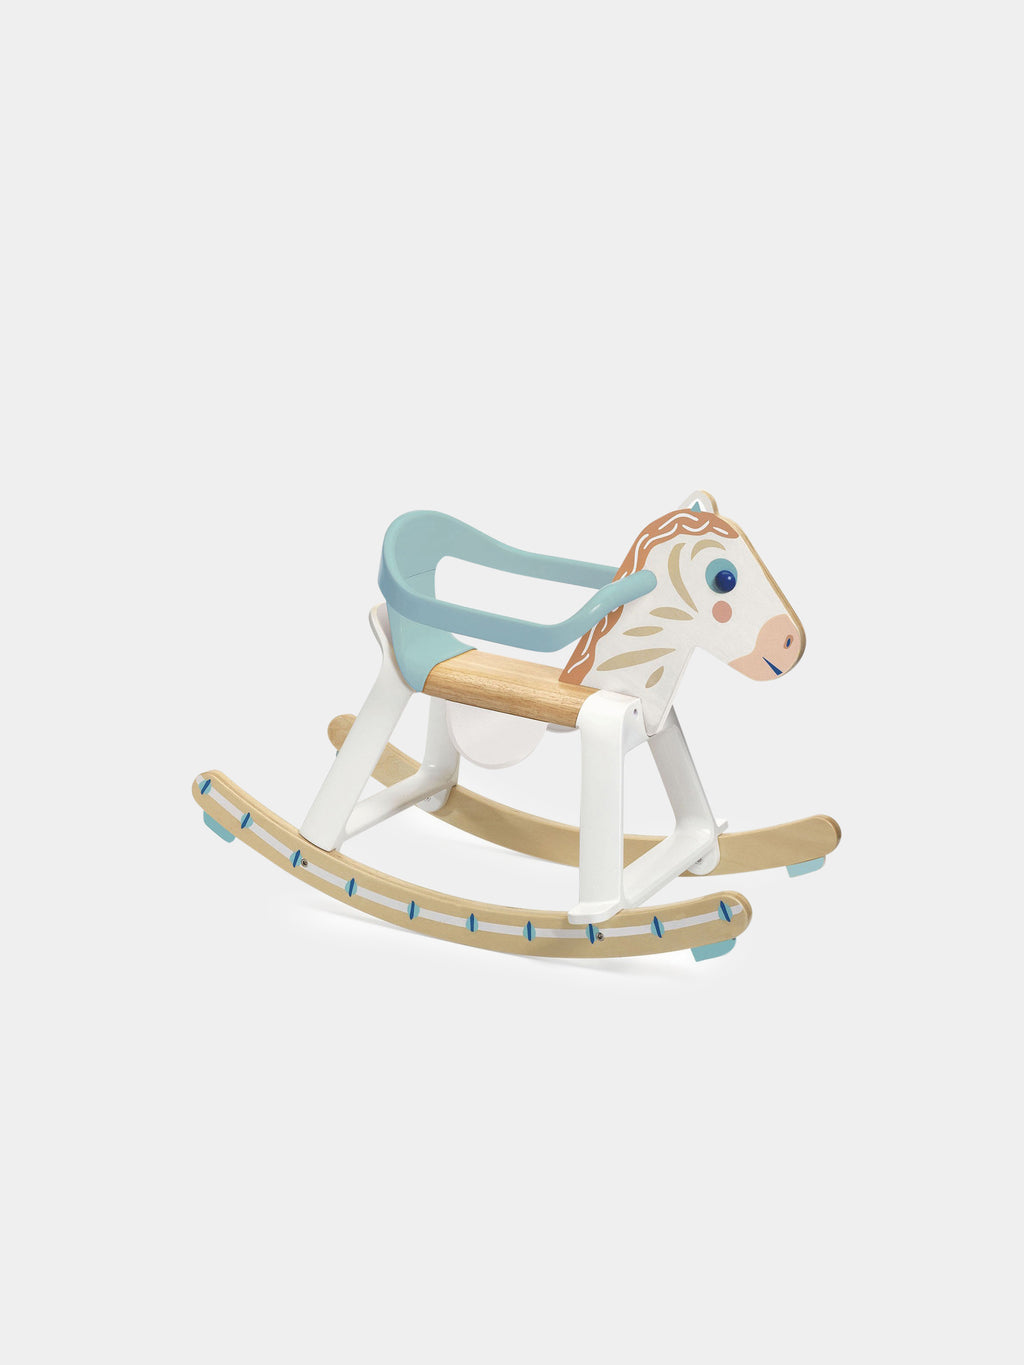 Colorful rocking horse for kids